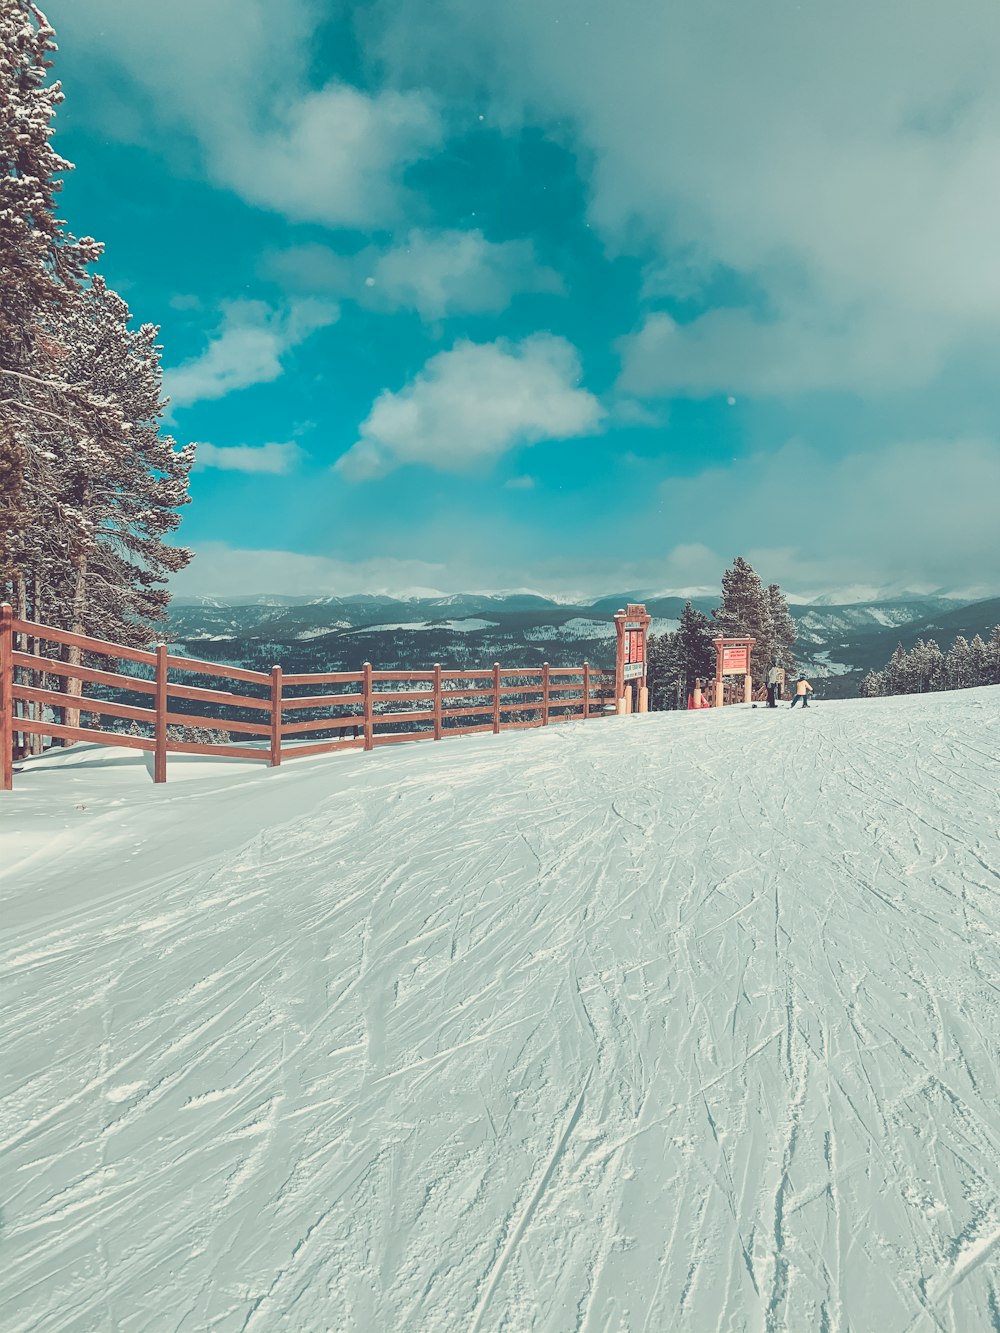 brown wooden fence on snow covered ground under blue sky and white clouds during daytime